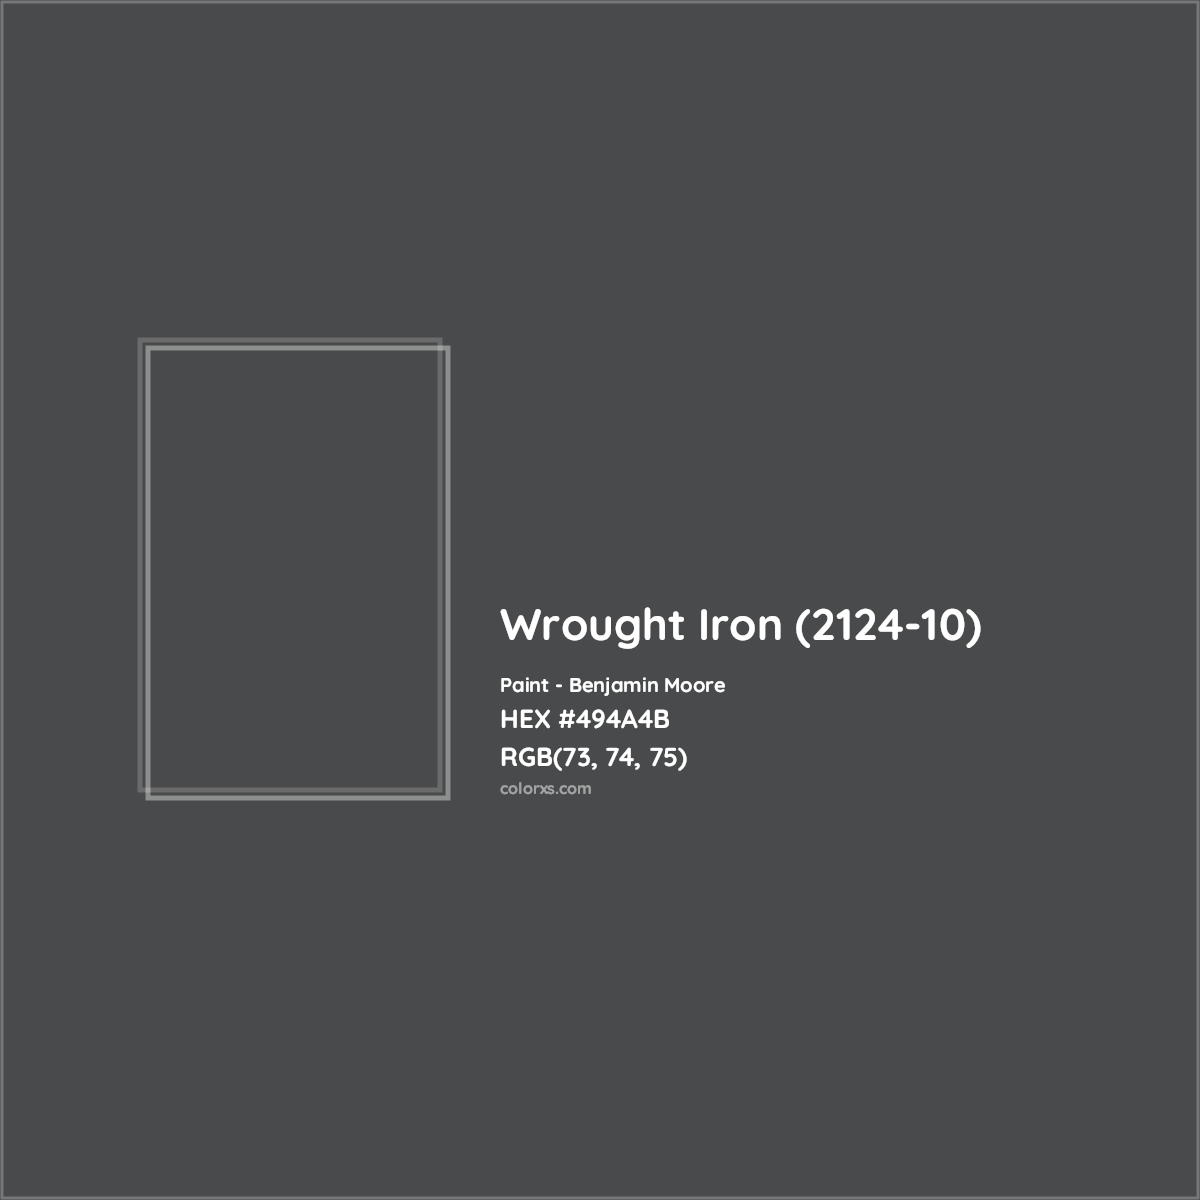 HEX #494A4B Wrought Iron (2124-10) Paint Benjamin Moore - Color Code